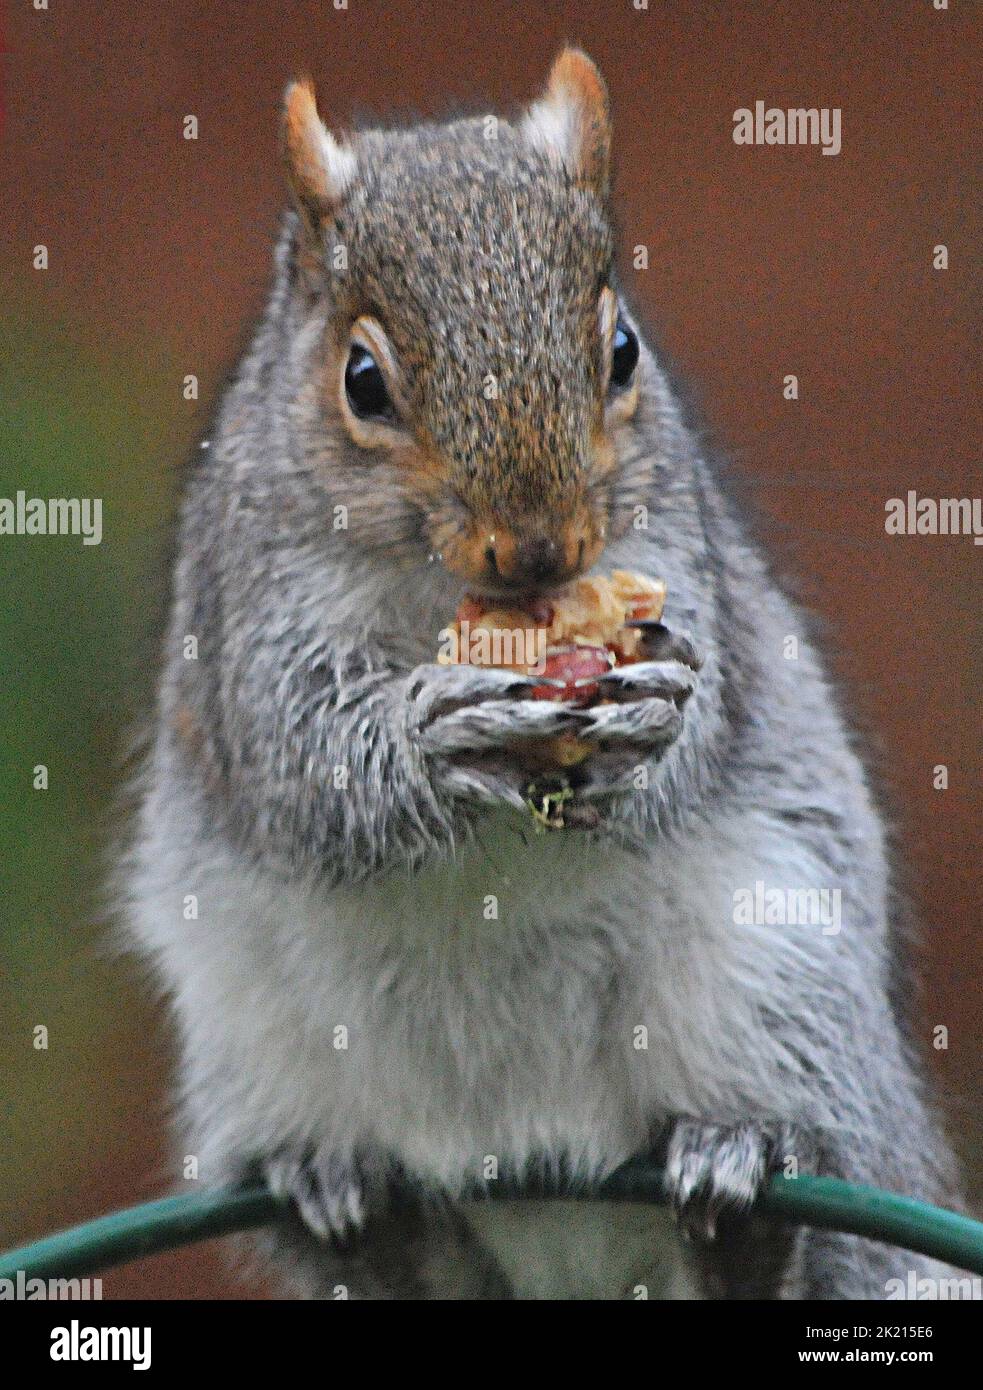 A grey squirrel goes nuts for the treats in his Christmas stocking which has been hung out on the bird feeder of nature lover Sue Perring from Purbrook in Hampshire.  Although the goodies are not easy to get at this resourceful rodent grapples with the swinging stocking until it finally manages to get his head inside to get his present... juicy nuts covered in peanut butter.  39 year  old Tax consultant Sue, who feeds the birds and squirrels all year round said :''I thought I would  have a bit of fun with the pesky little creatures by hiding some special treats of walnuts and hazel nuts coated Stock Photo